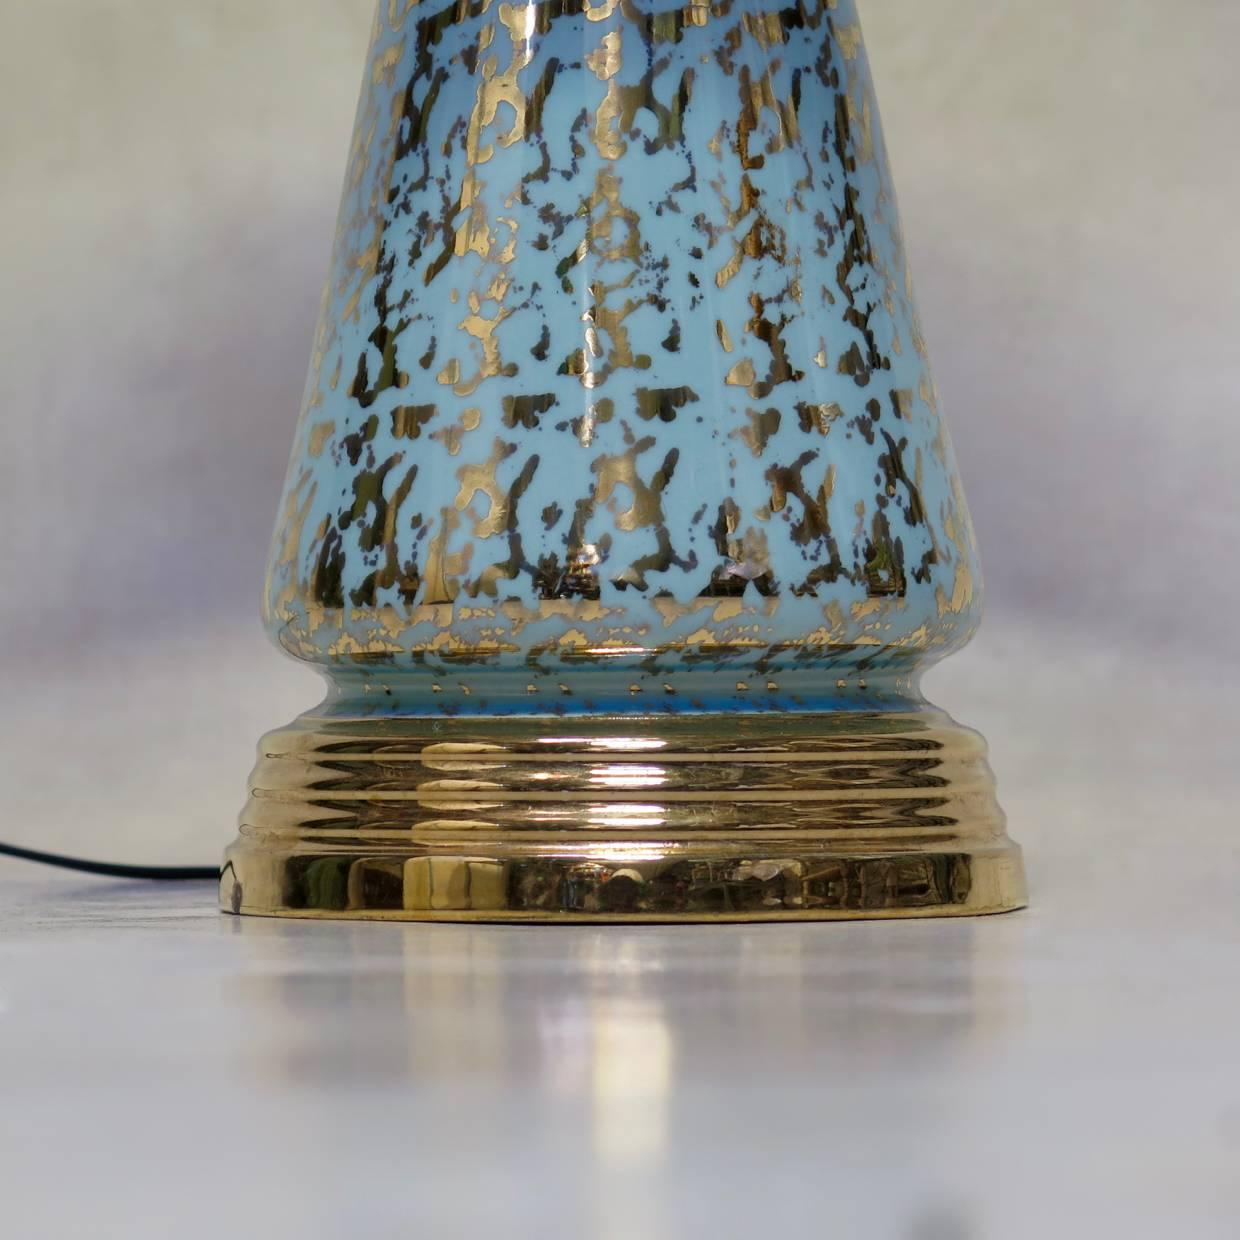 Pair of Gold Speckled Porcelain Lamps with Paper Shades, USA, 1950s For Sale 1